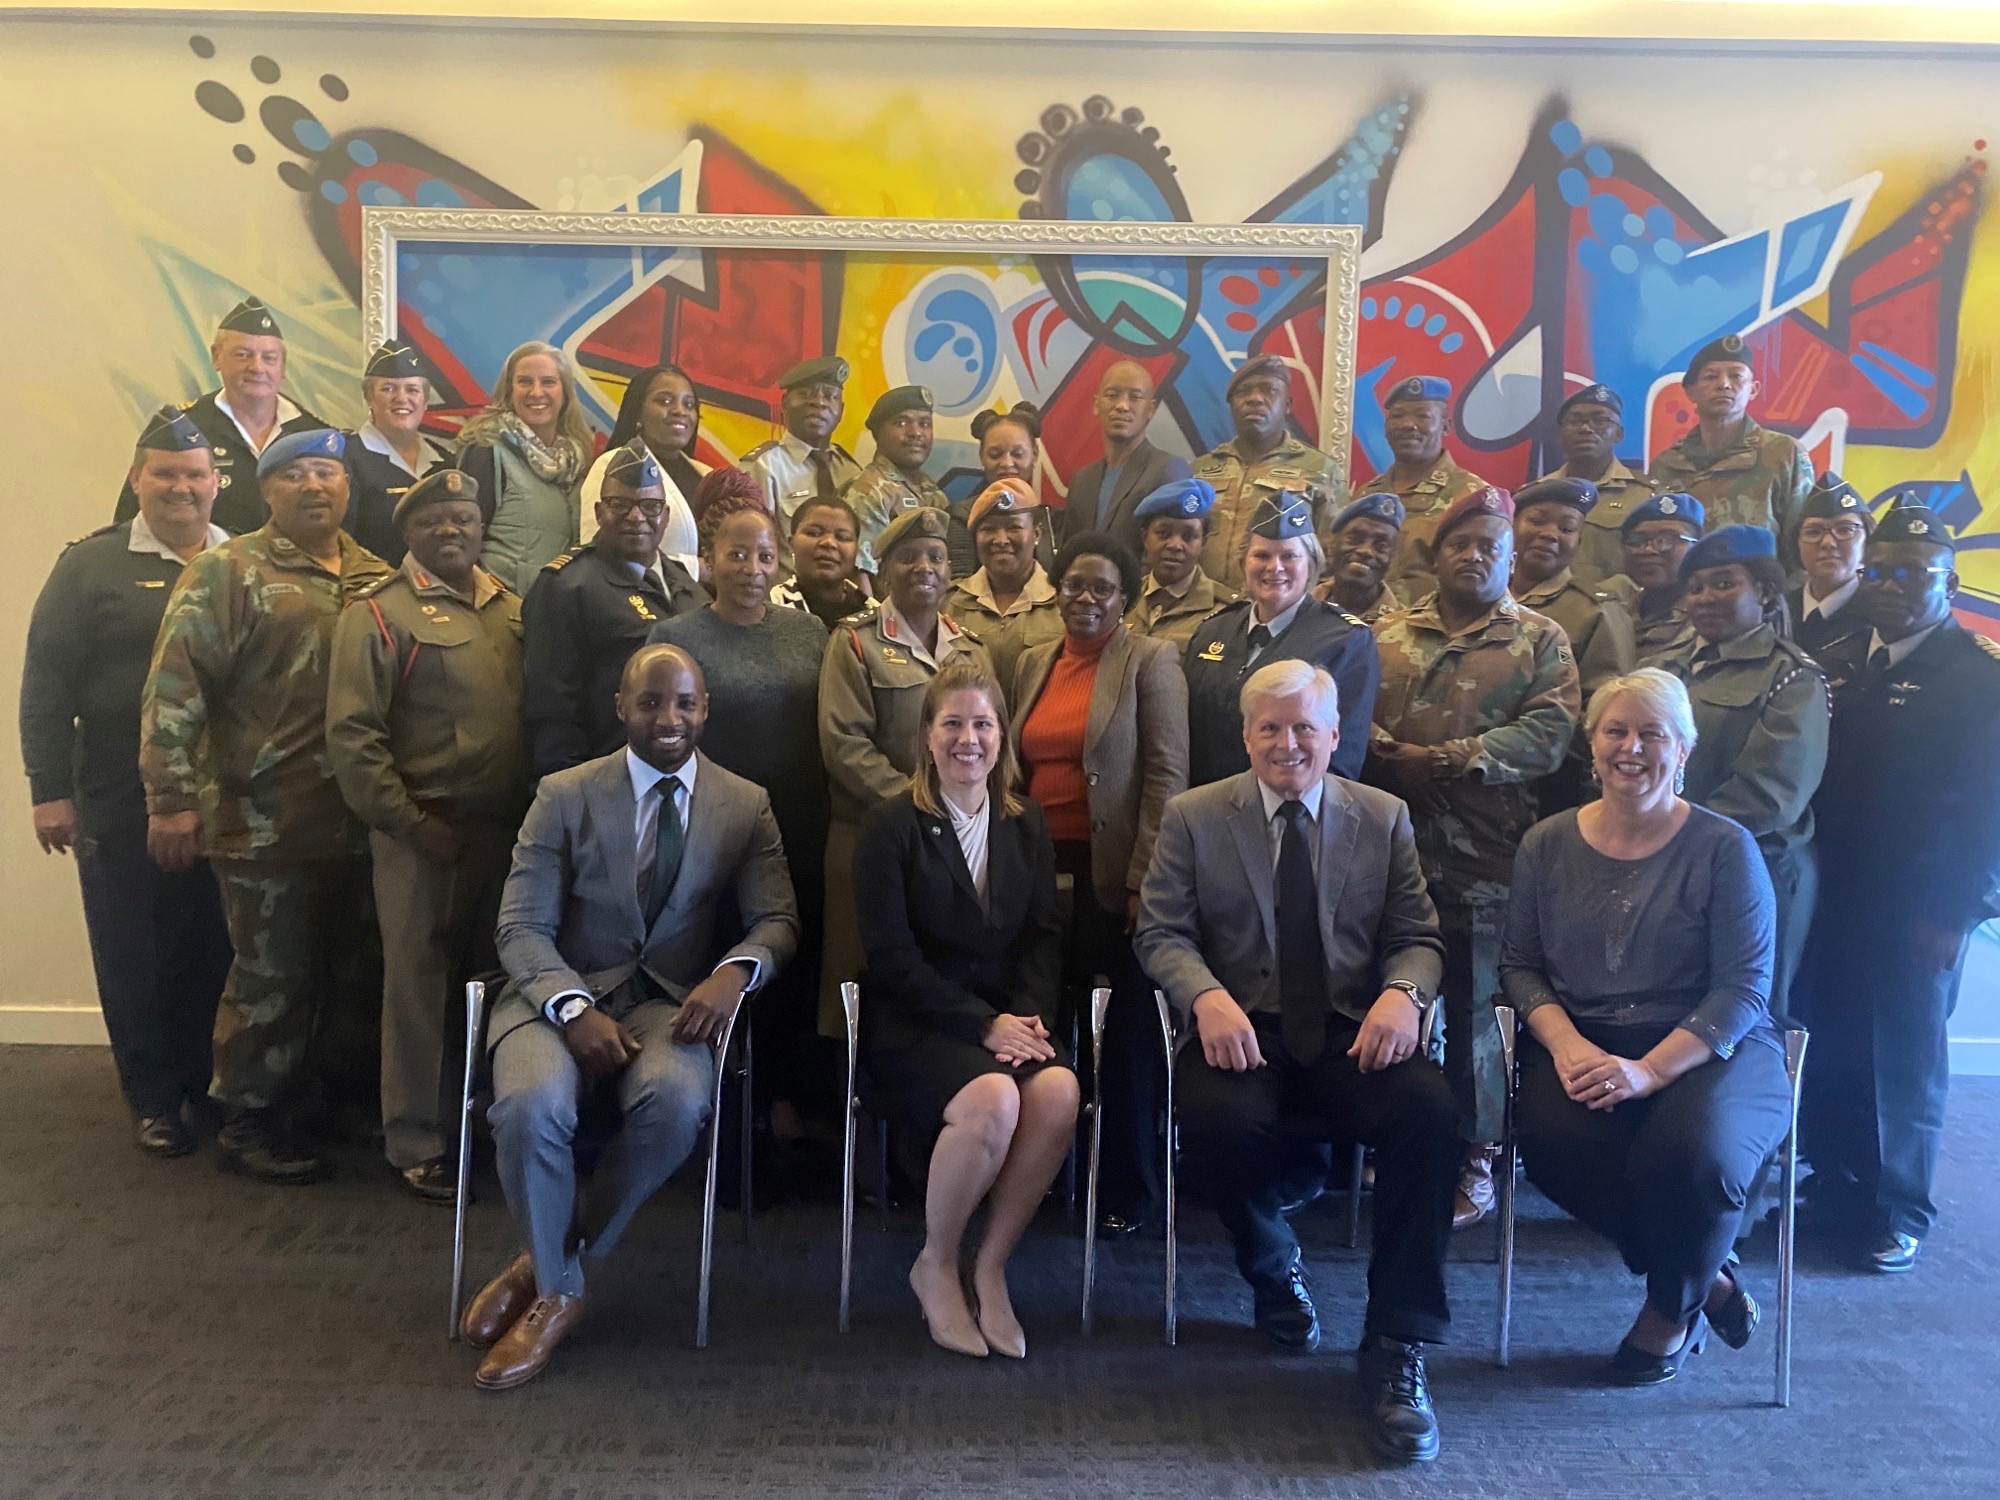 A picture of ISG's IDARM team alongside with the South African National Defense Force